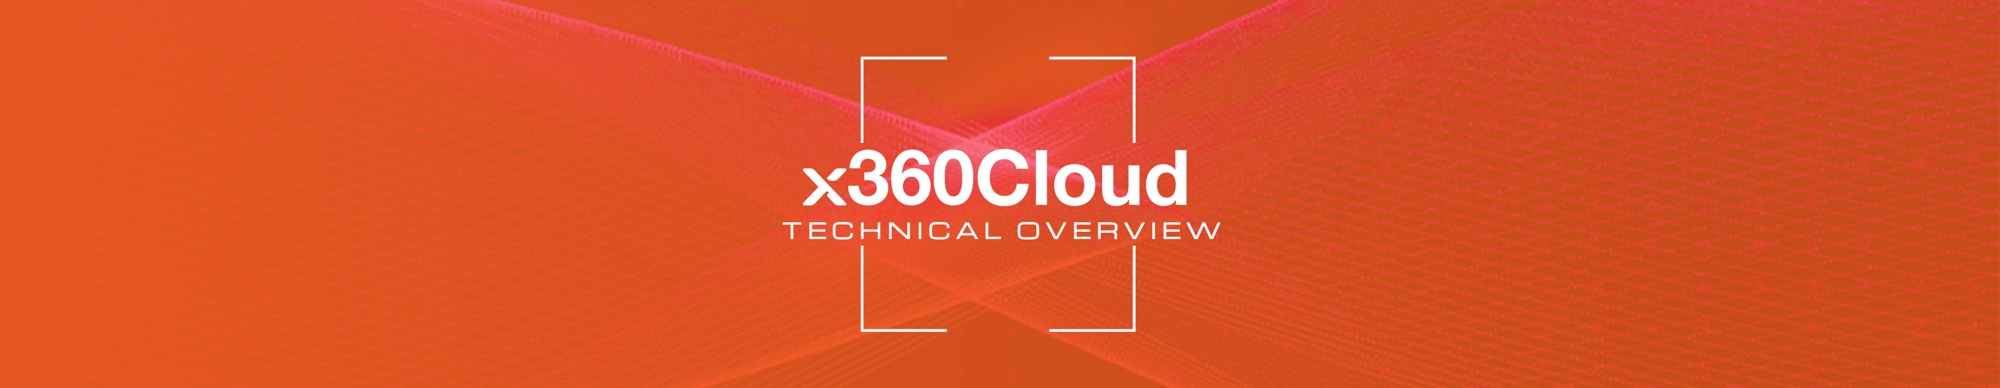 Axcient x360Cloud Technical Overview